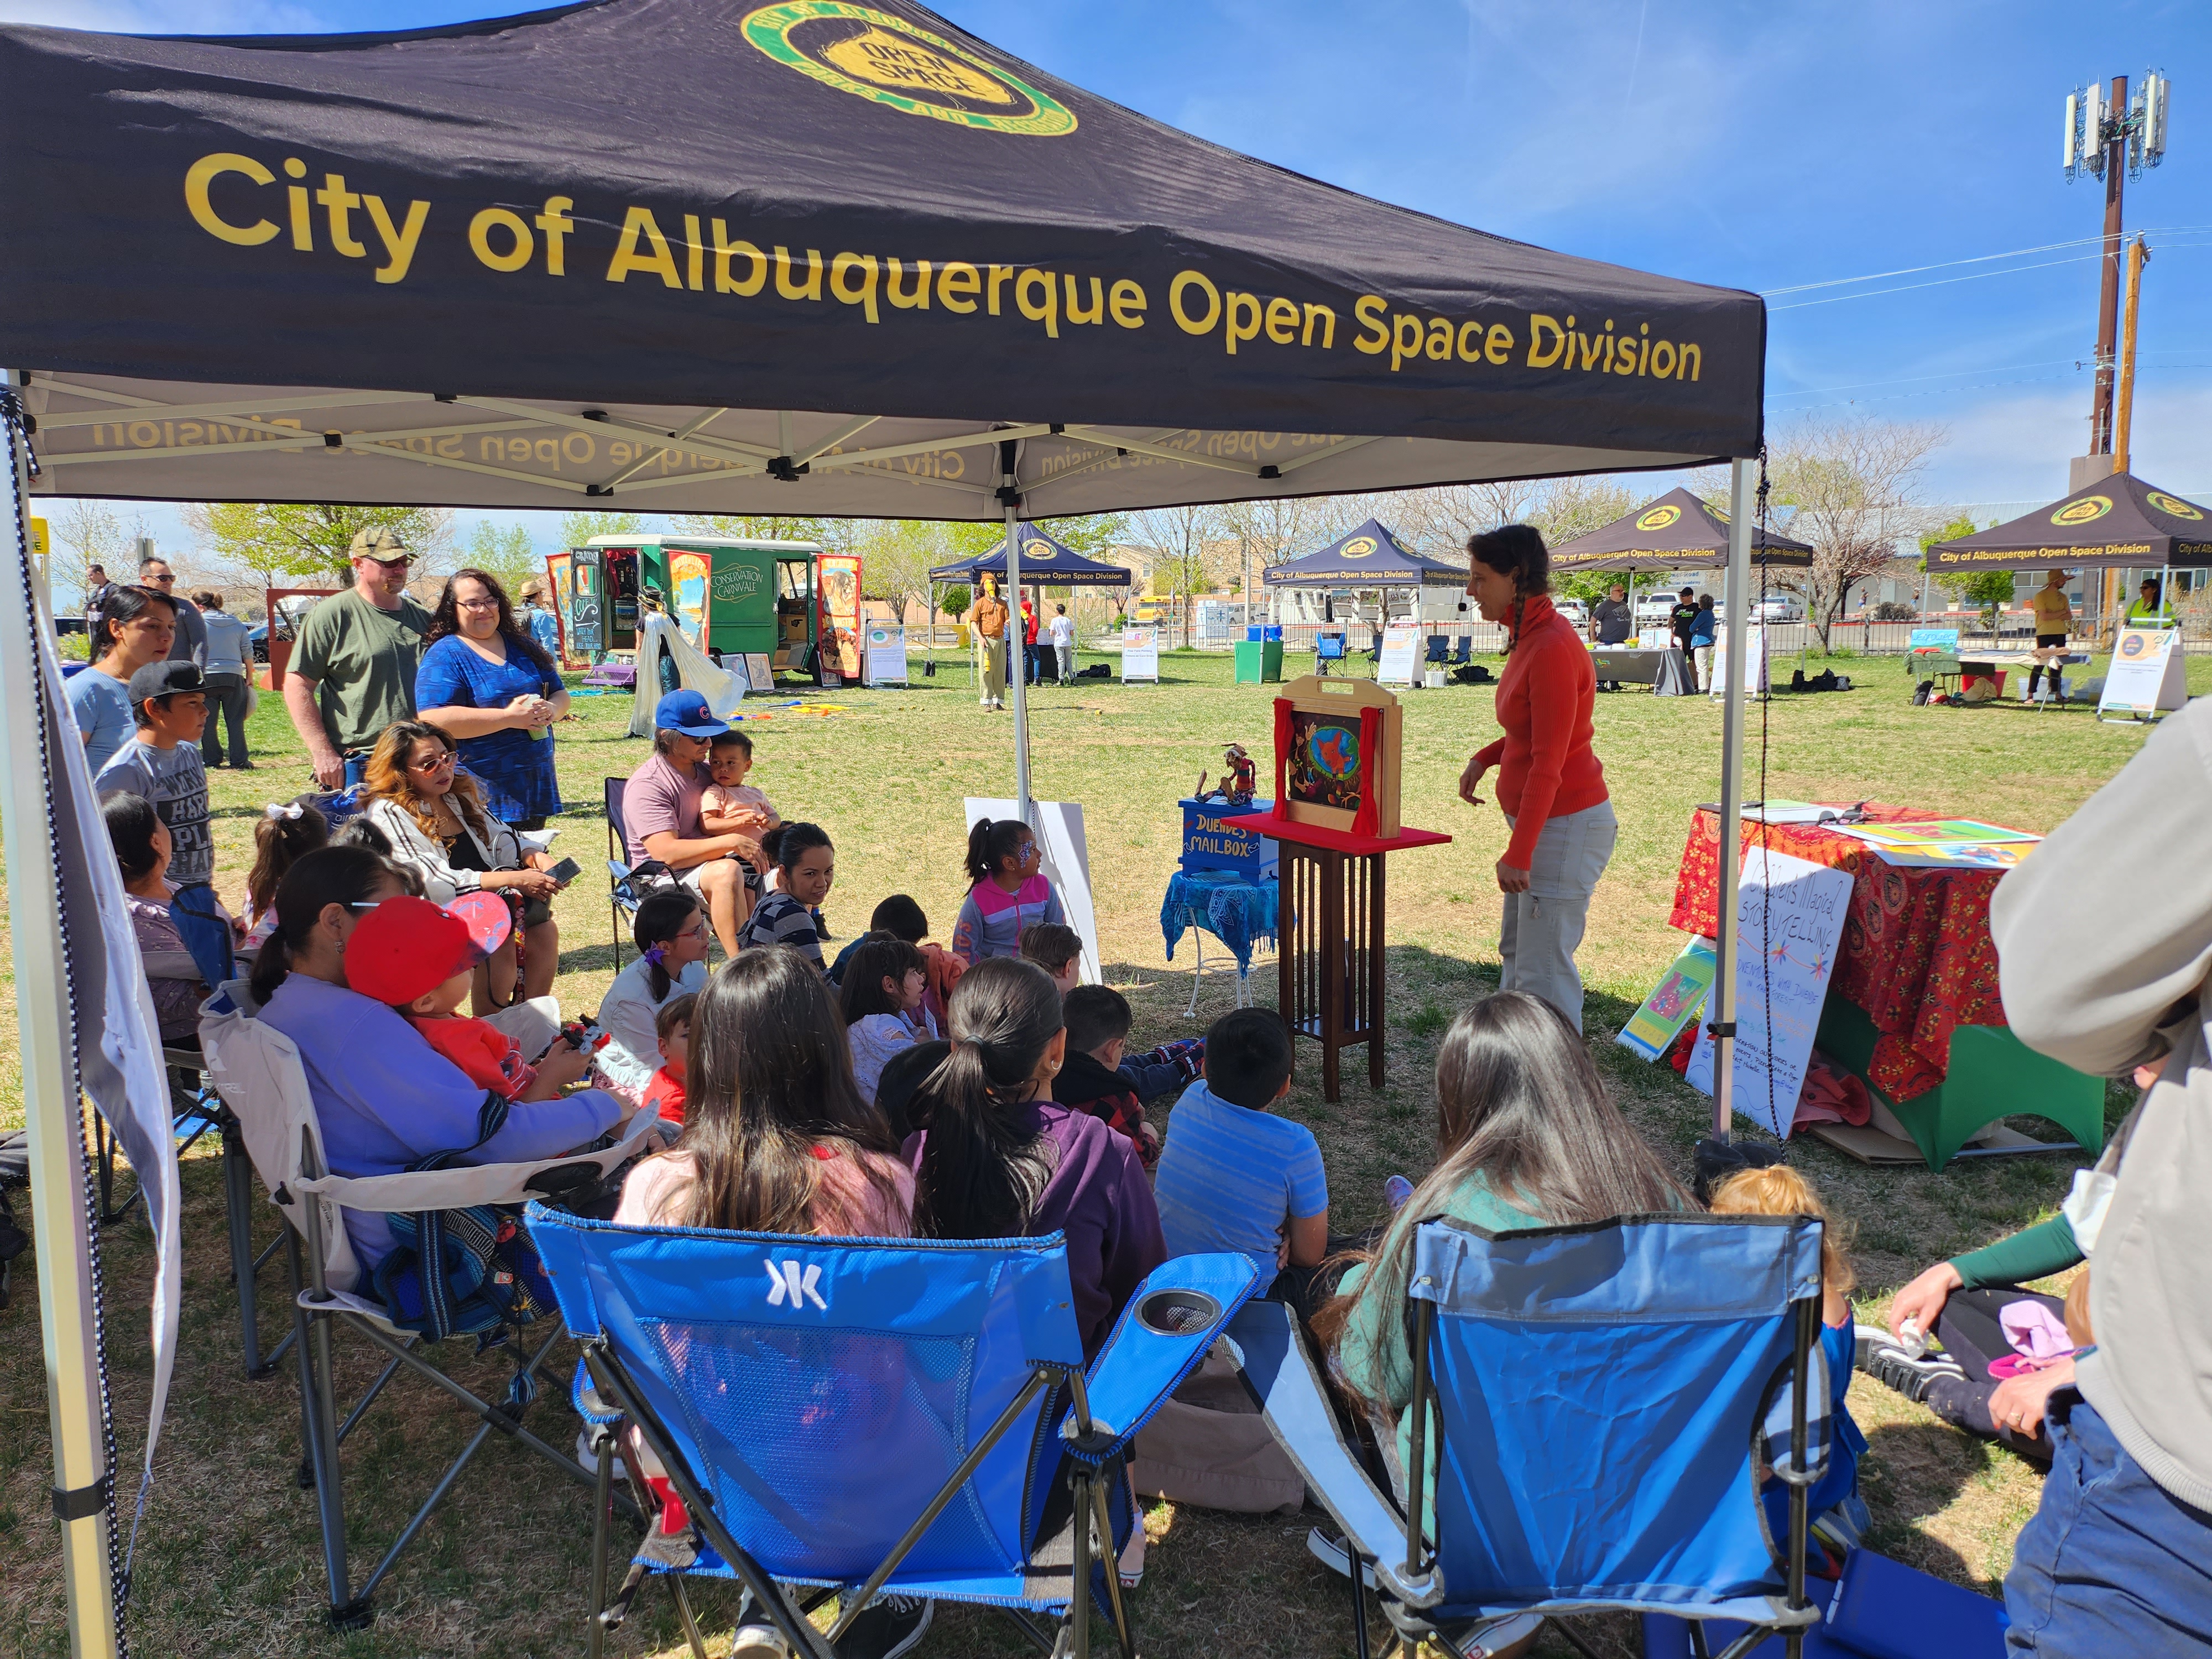 Open Space community event outdoors on grass. An audience sitting in lawn chairs under an Open Space tent while watching a performer with props.